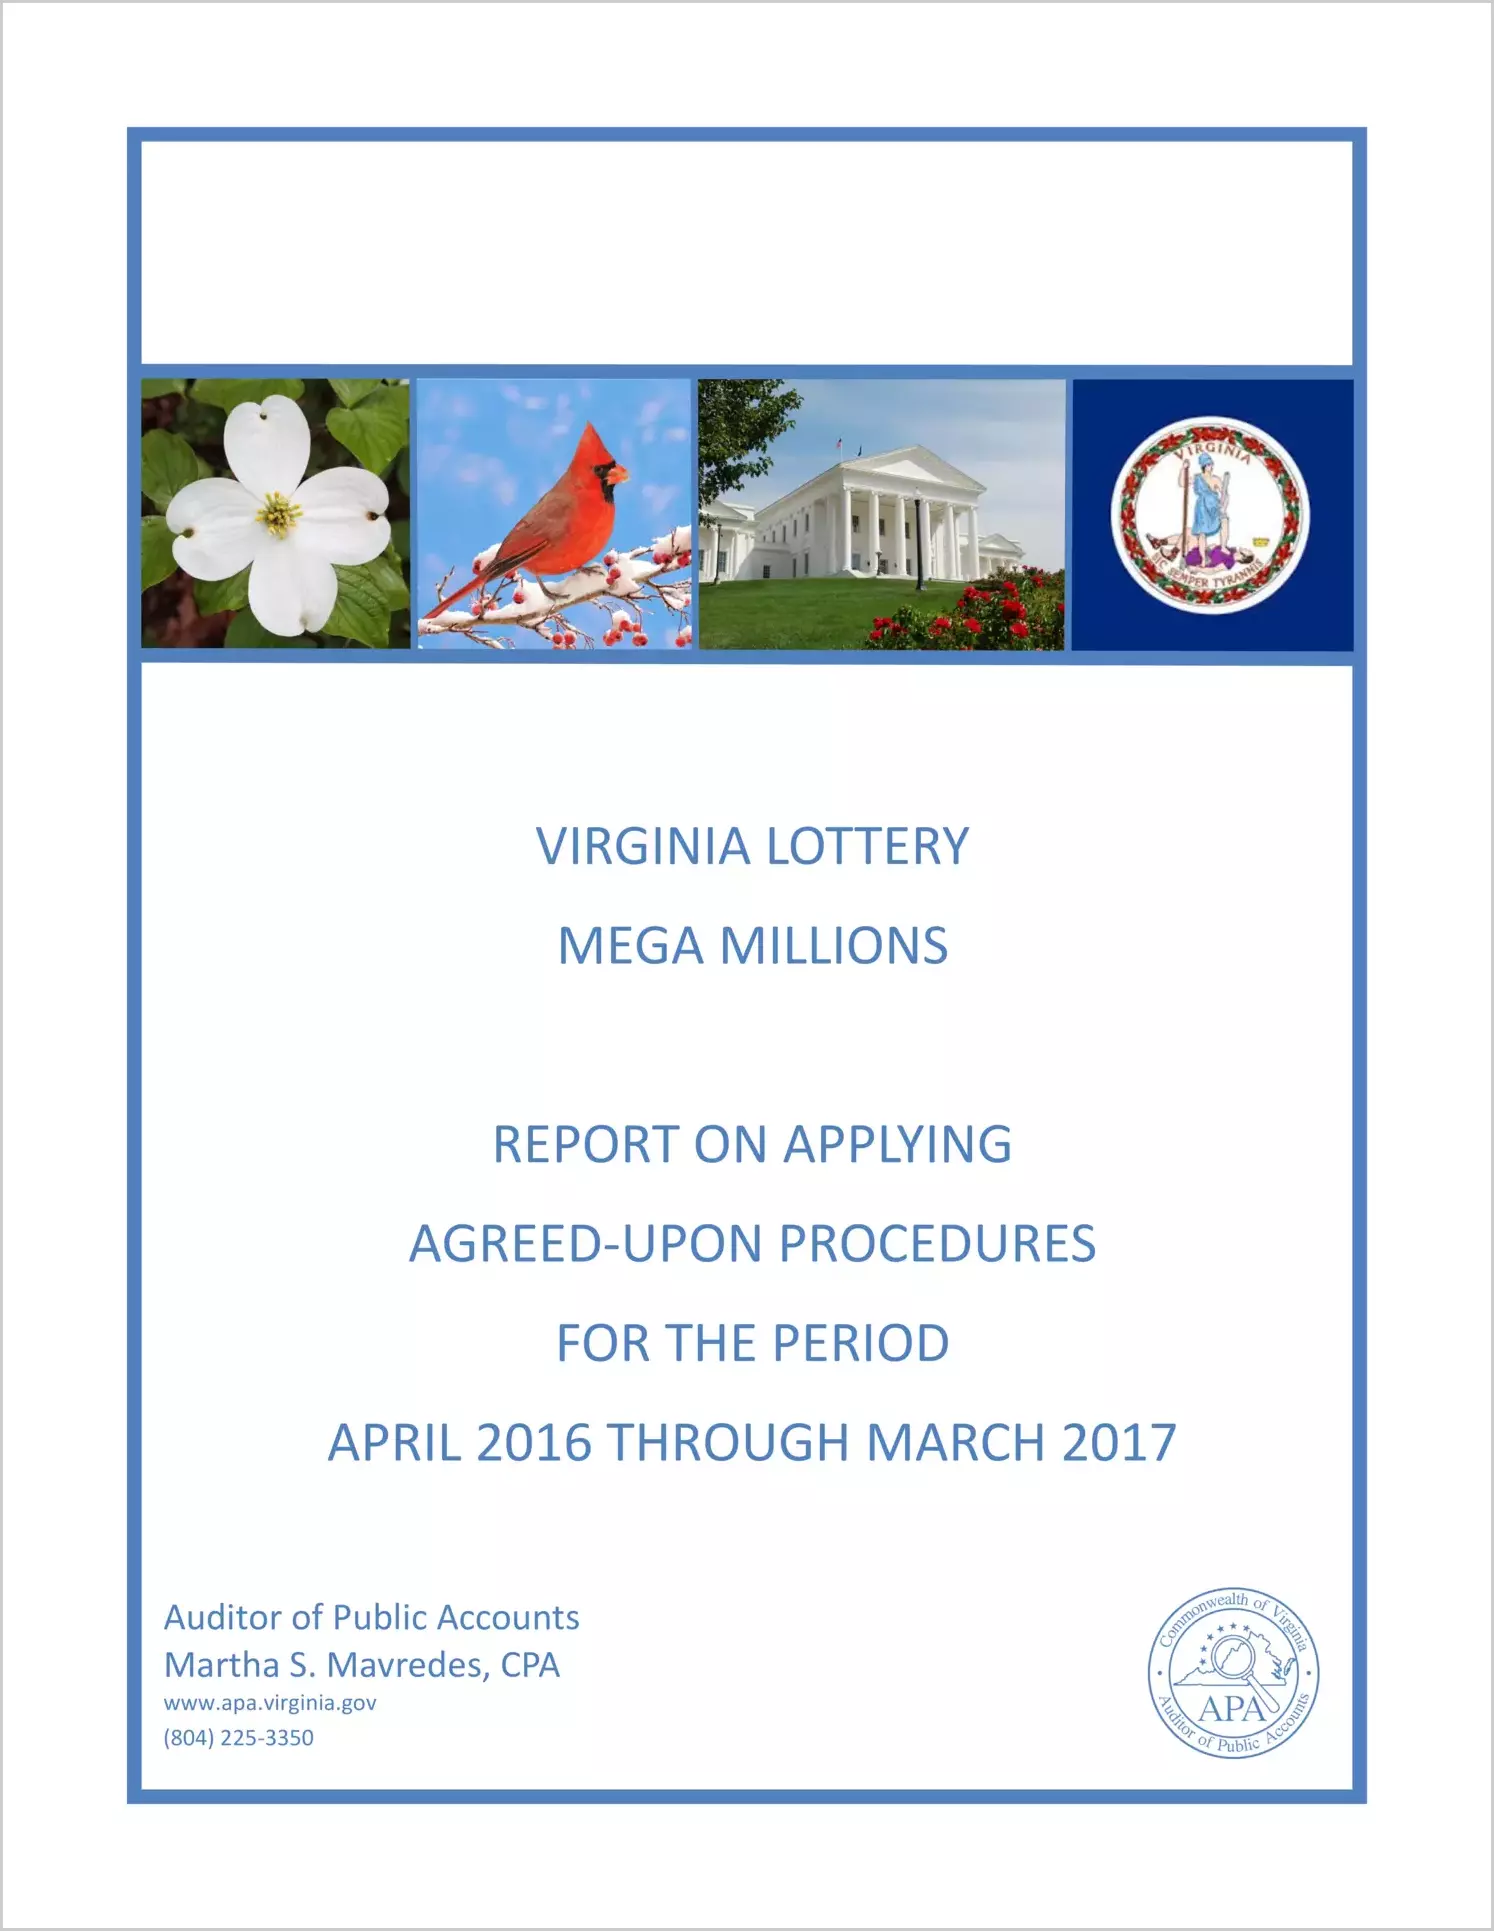 VA Lottery Mega Millions report on Applying Agreed-Upon Procedures for the period April 2016 through March 2017